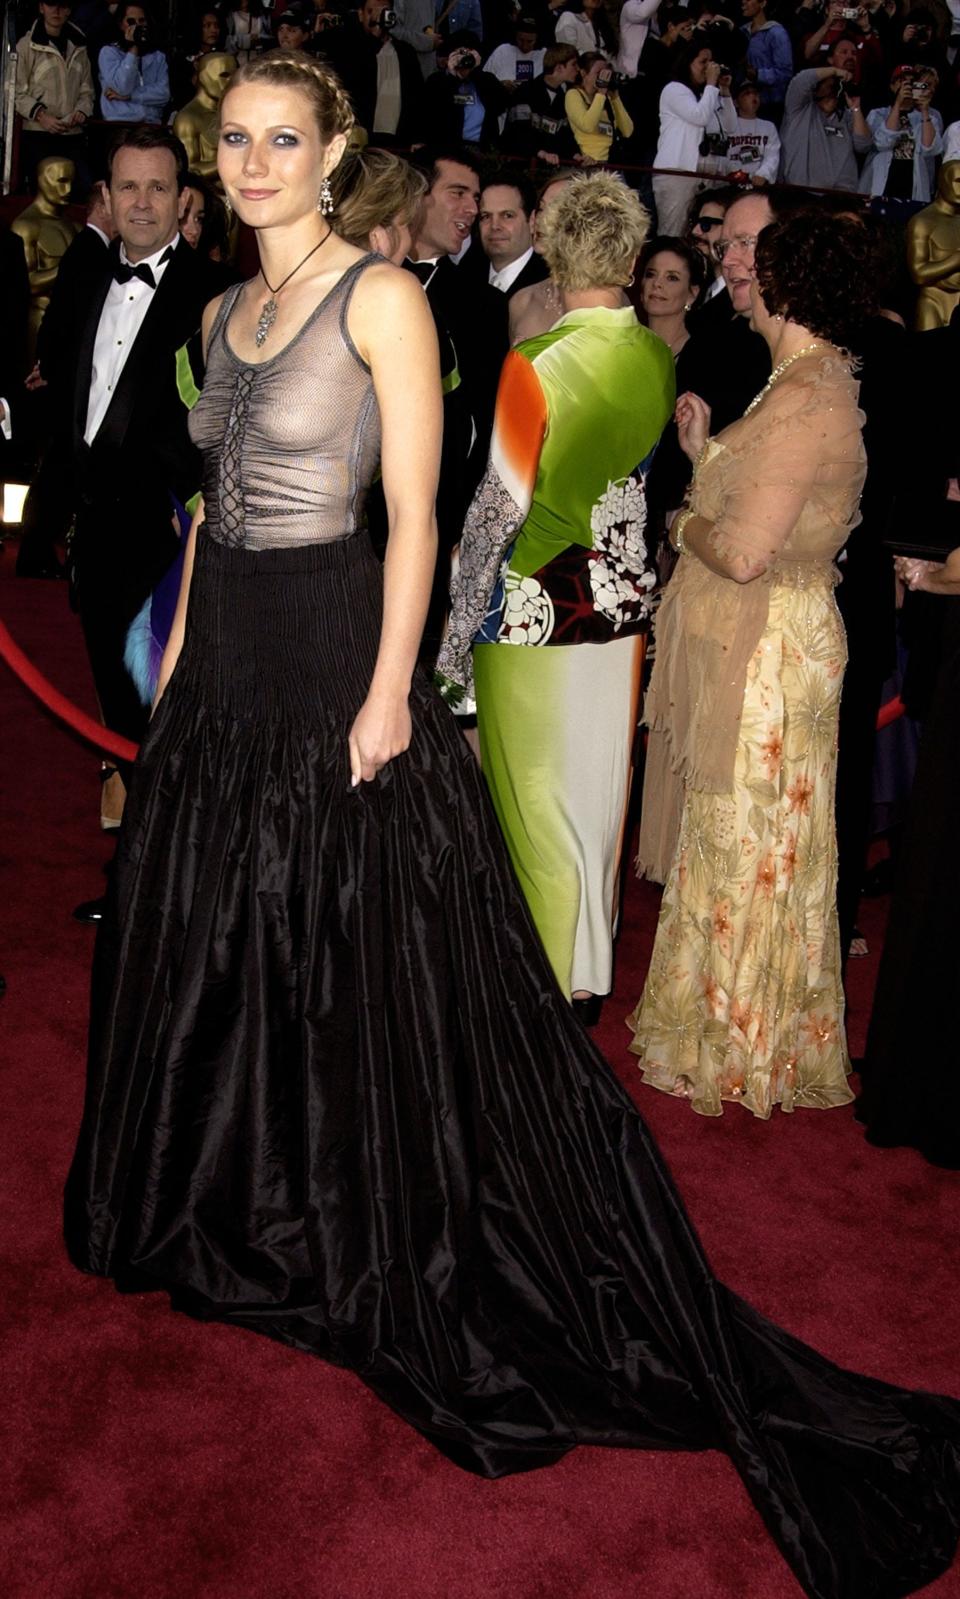 Gwyneth Paltrow poses on the red carpet at the 2002 Oscars in a black and gray gown.